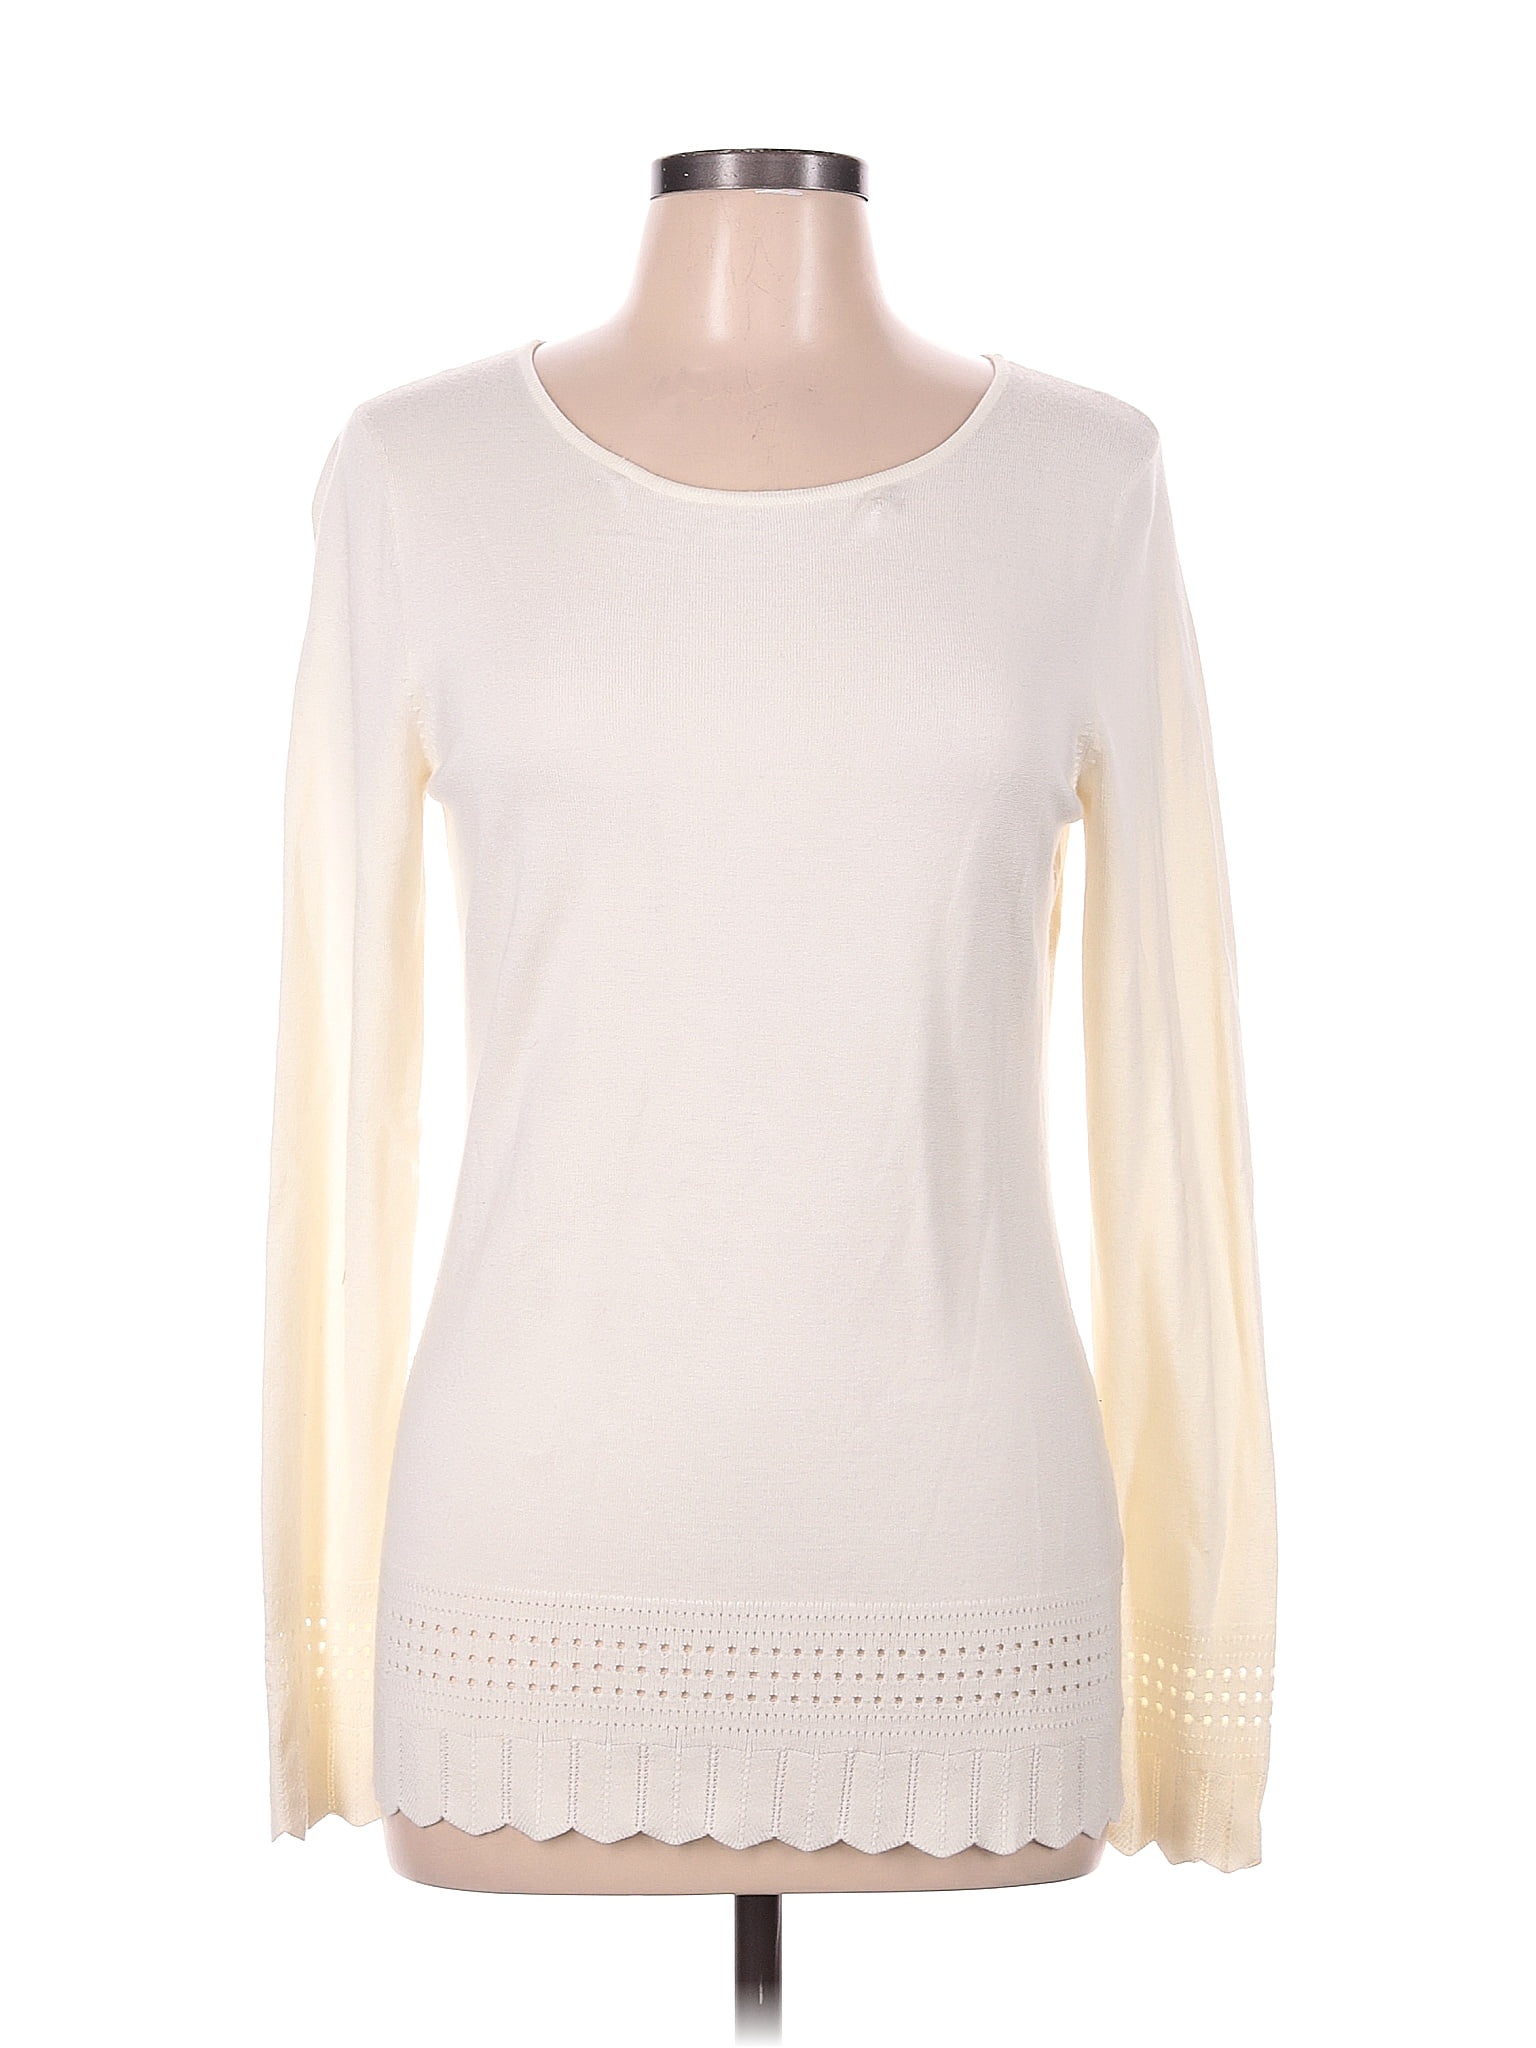 41Hawthorn Color Block Solid Ivory Pullover Sweater Size M - 67% off ...